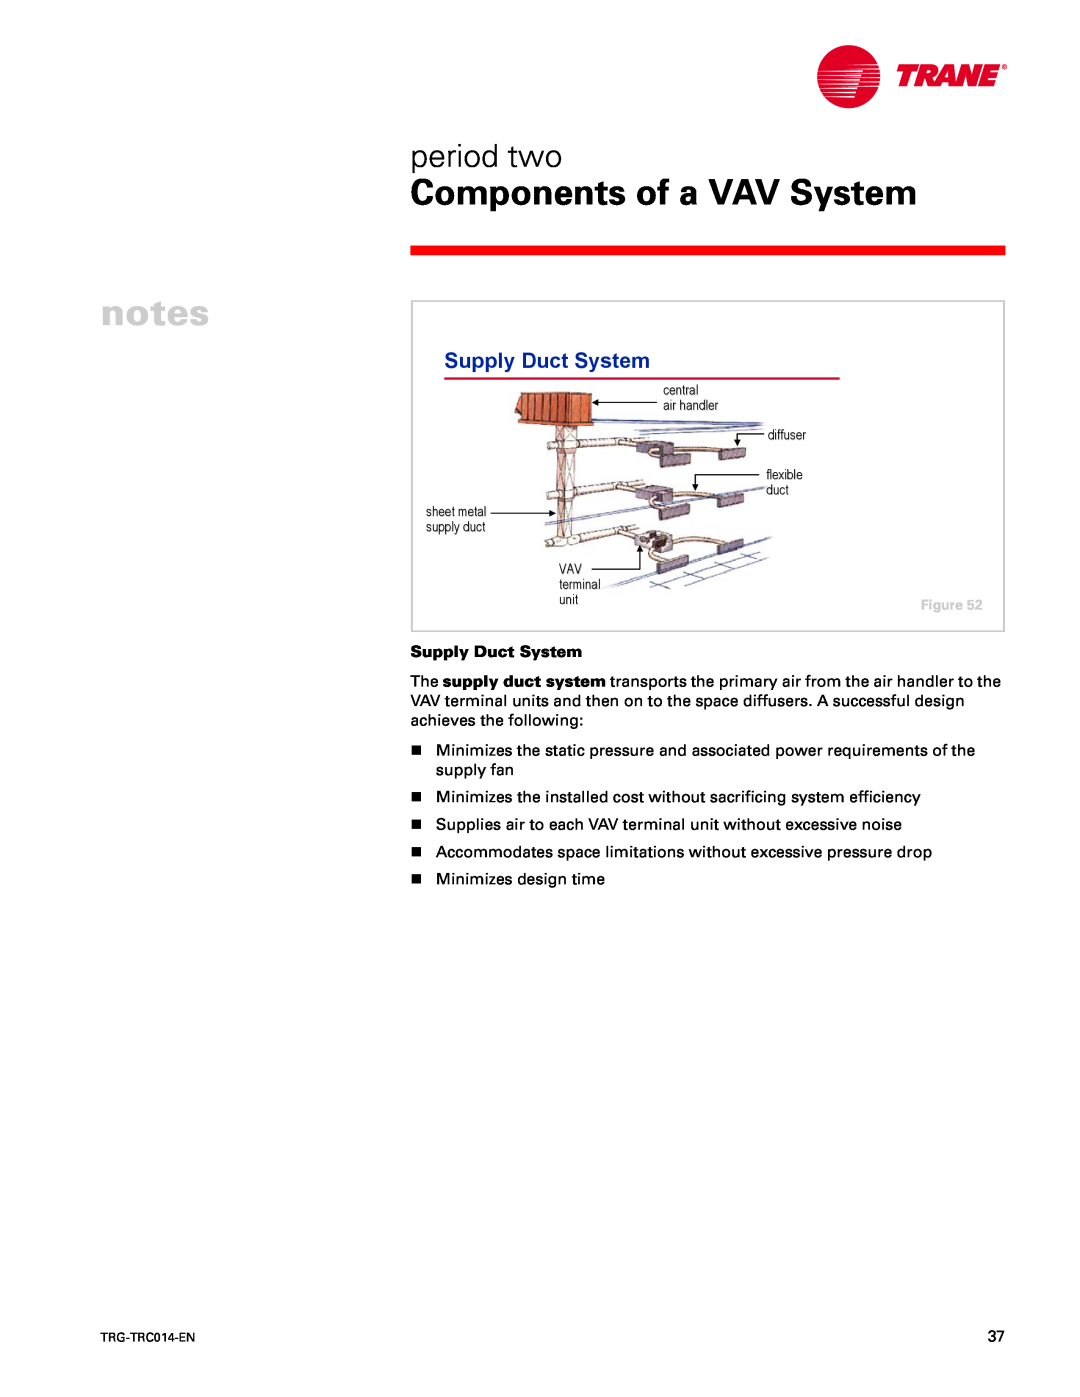 Trane TRG-TRC014-EN manual Supply Duct System, Components of a VAV System, period two 